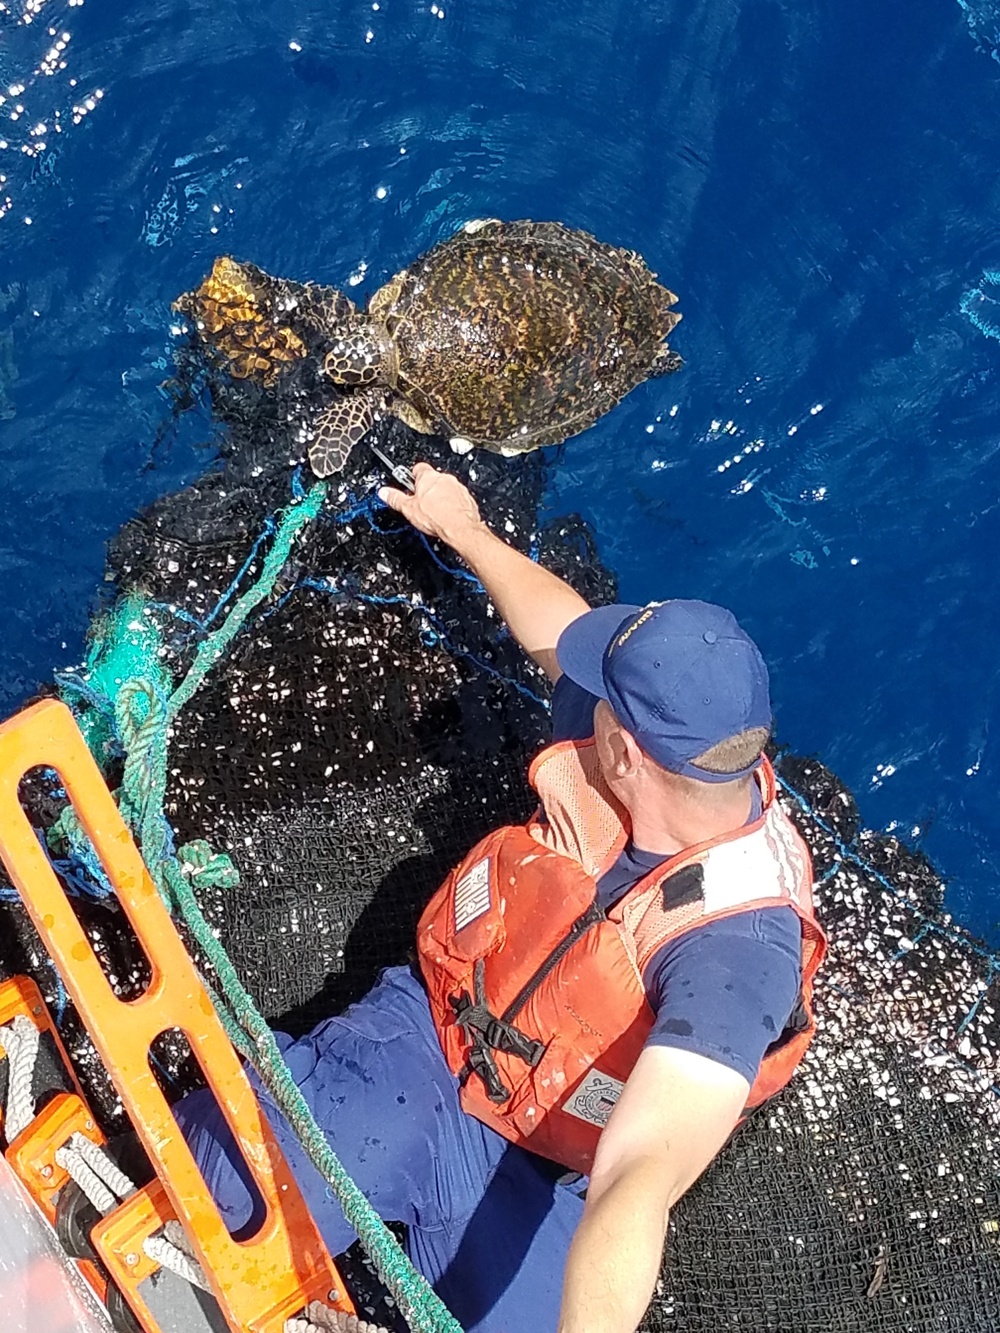 Coast Guard Cutter Spencer rescues entangled sea turtles during counter-narcotic patrol